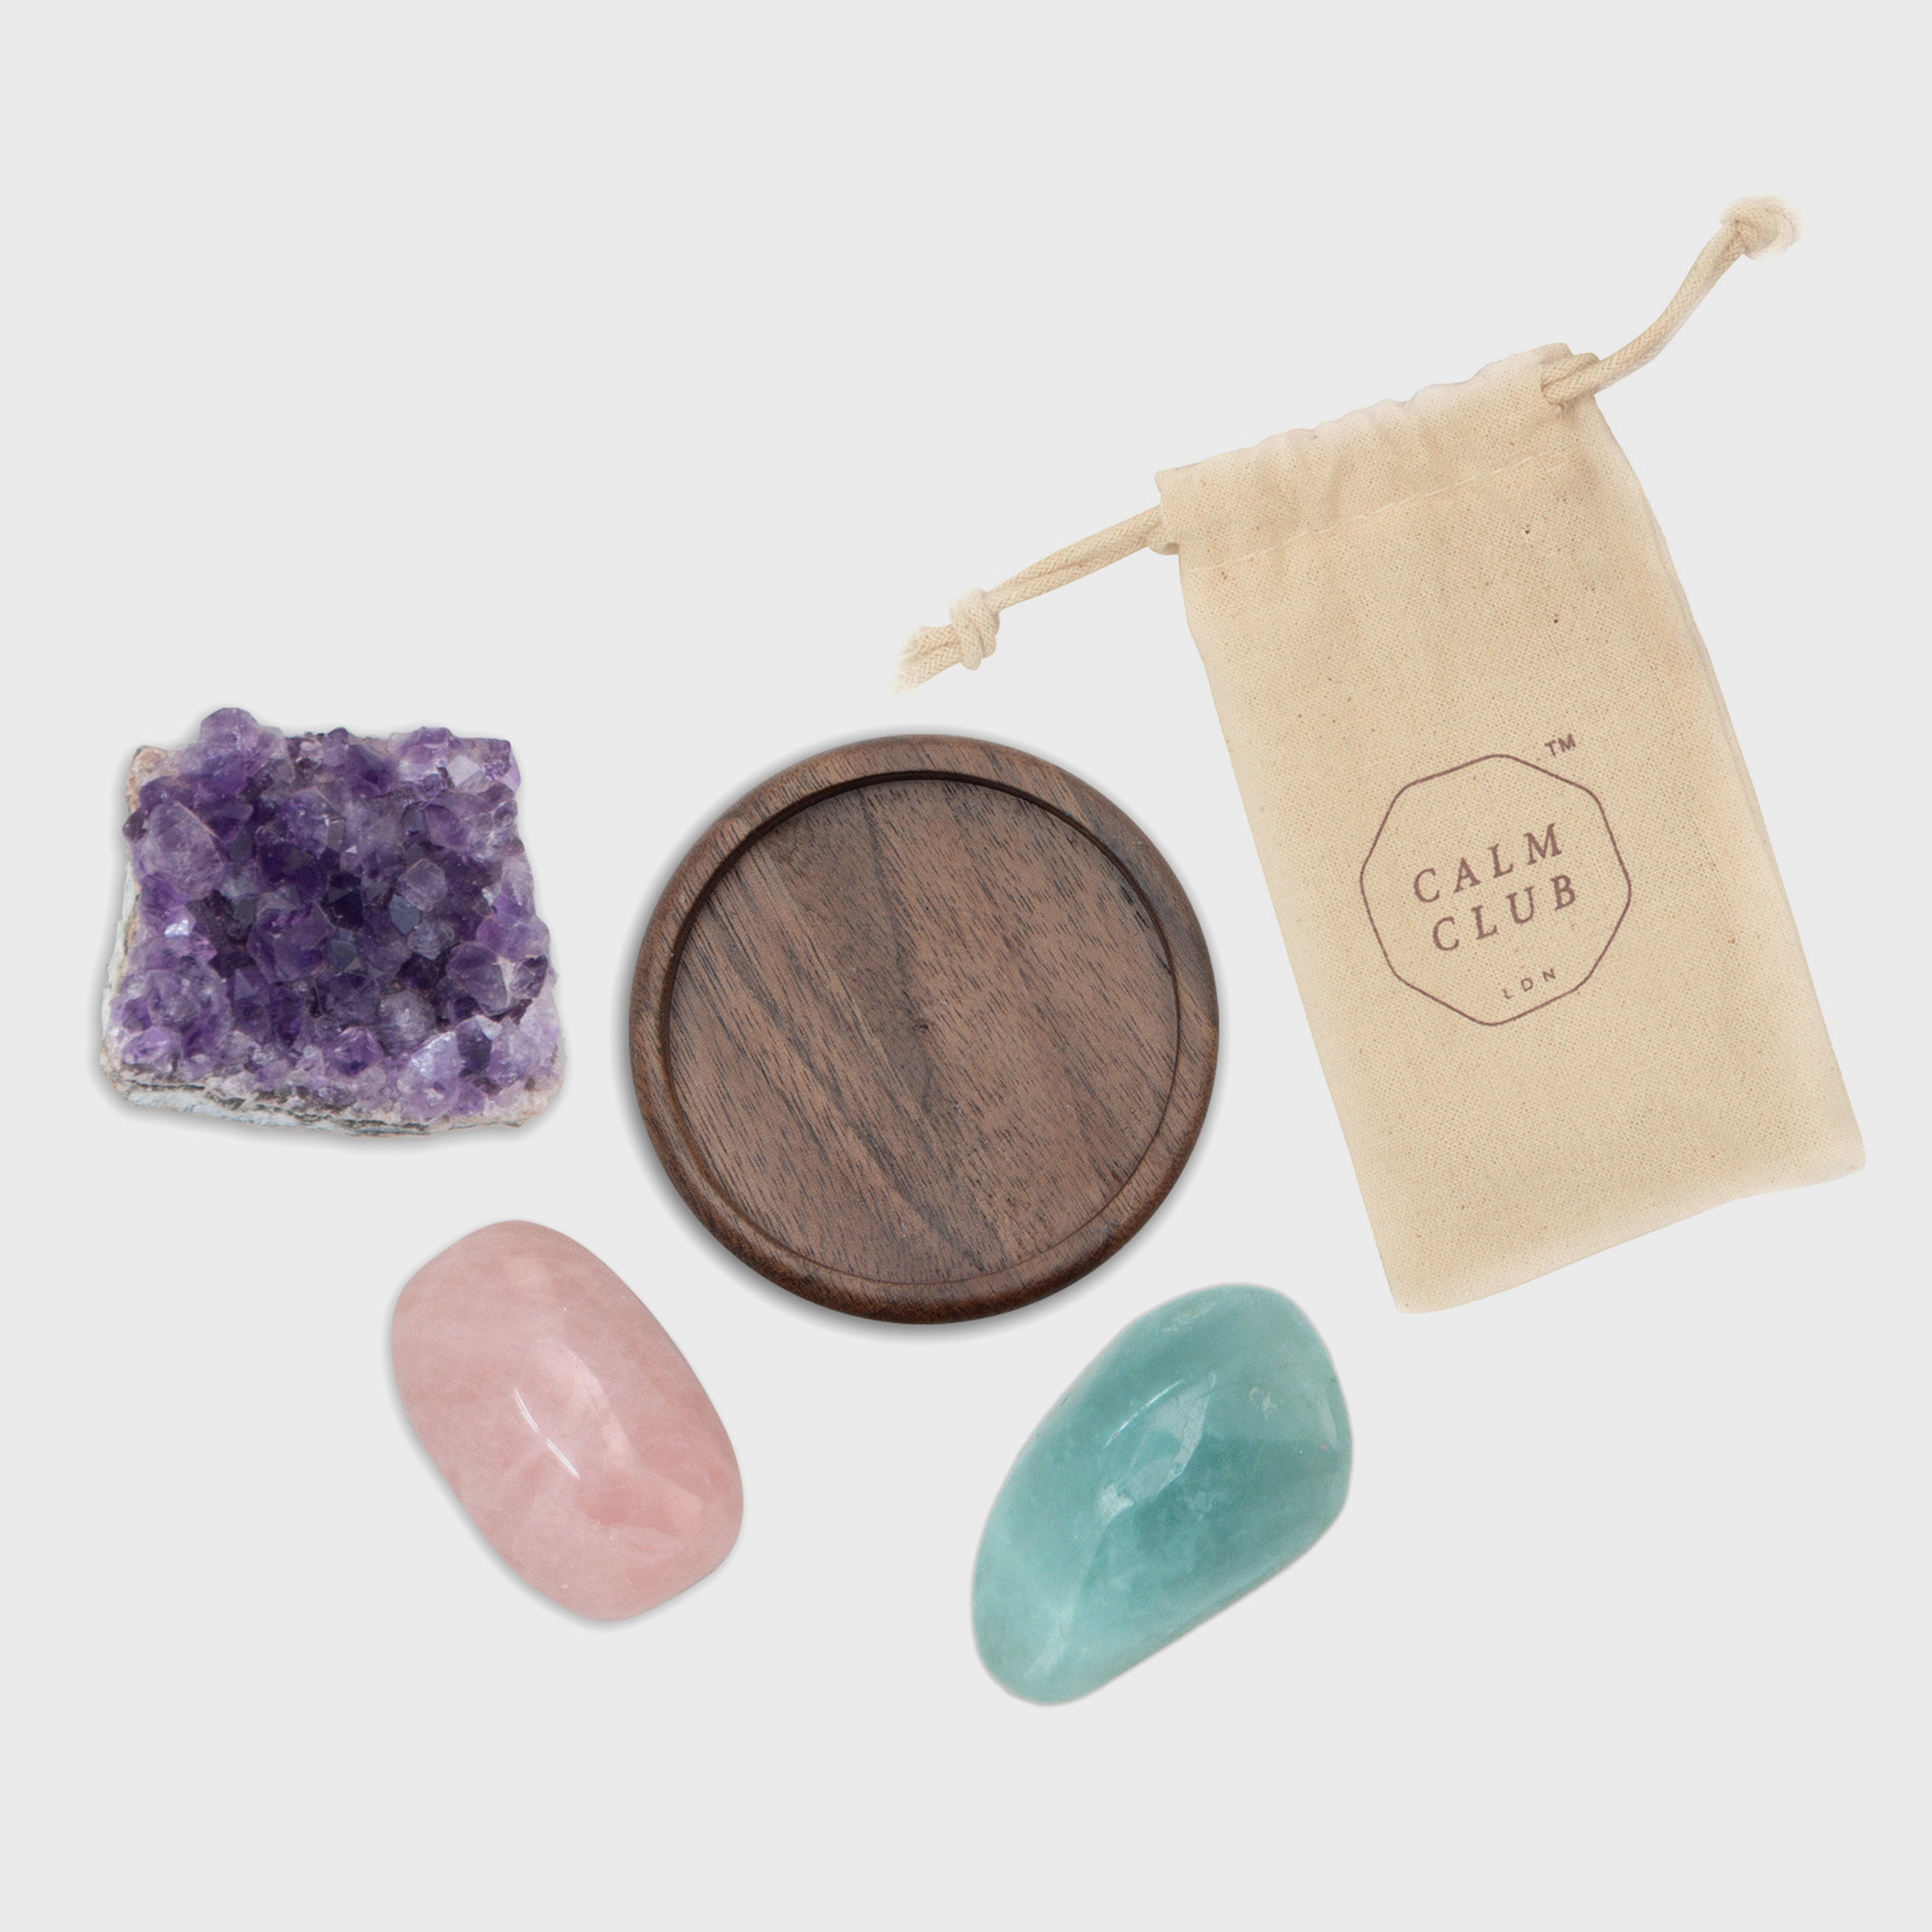 Calm Club Relaxation healing stones set contents